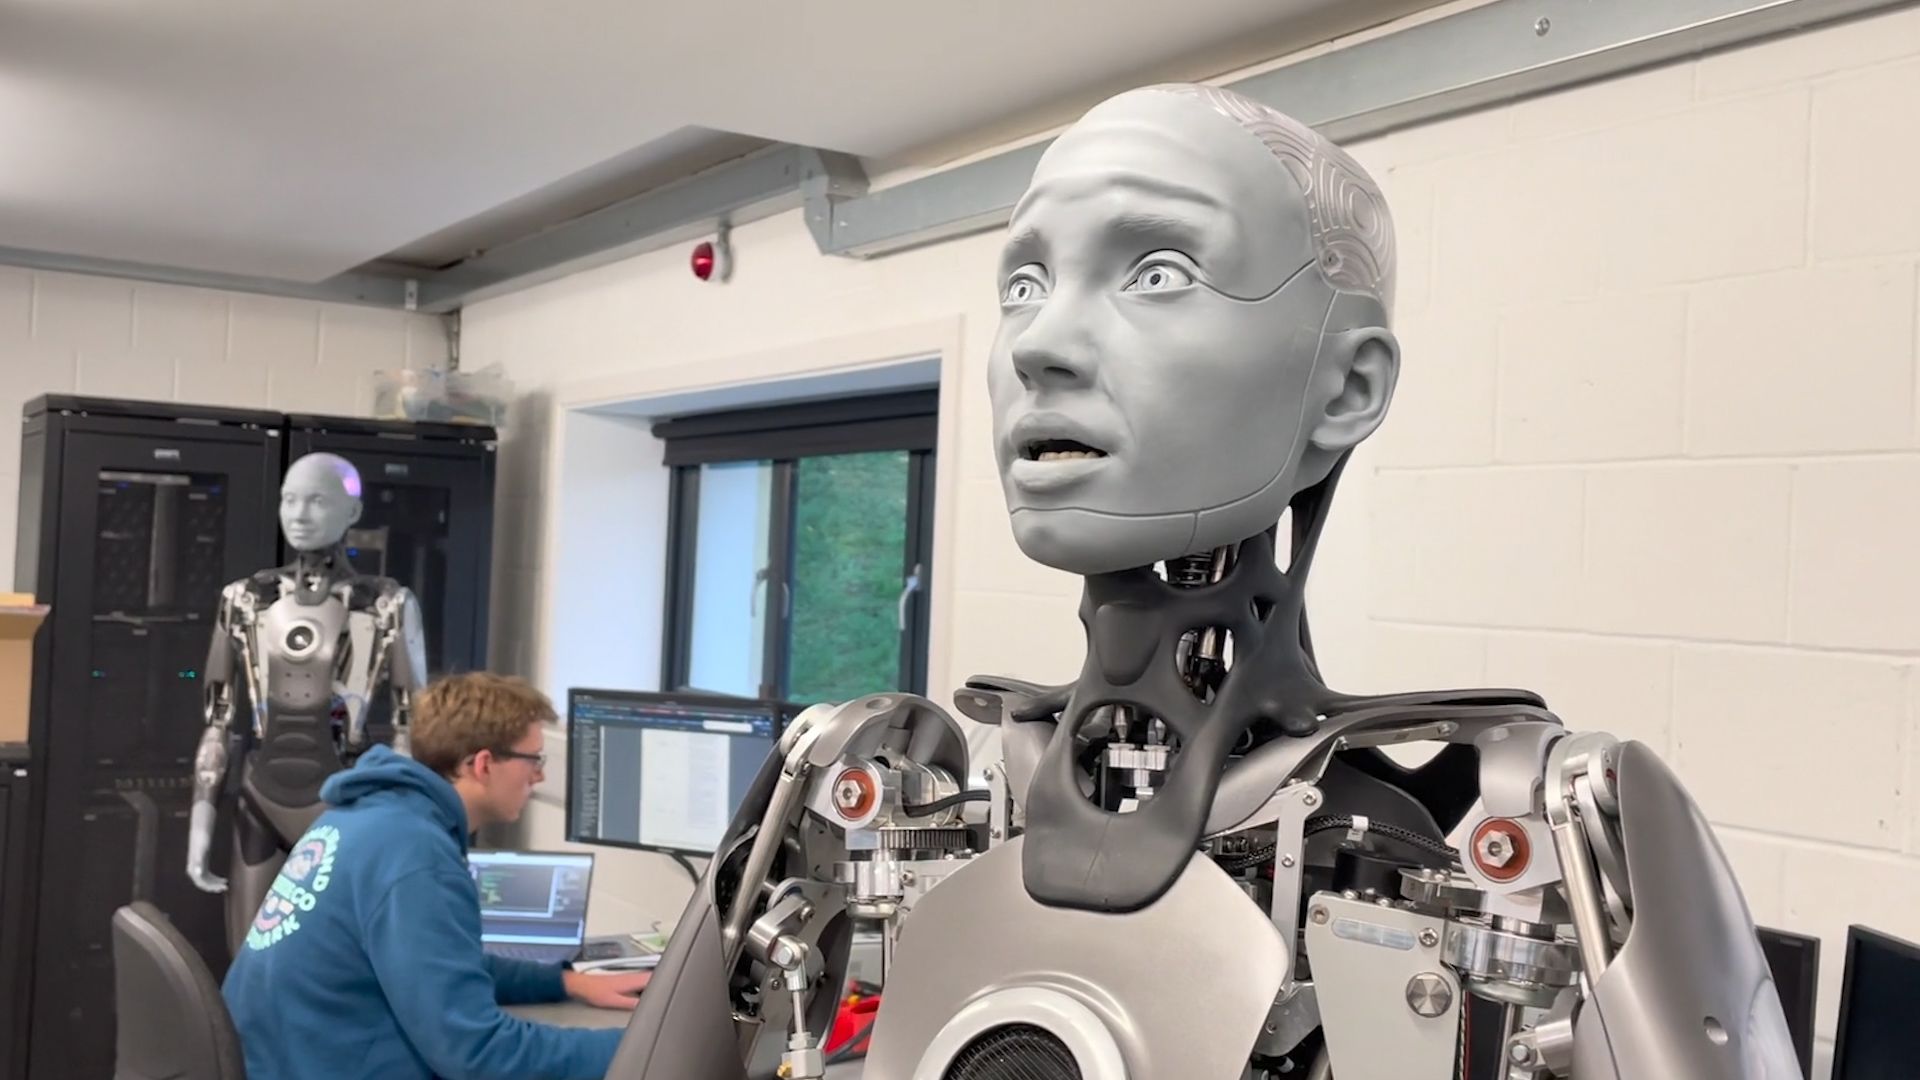 Watch: Humanoid Ameca shows facial expressions | Business